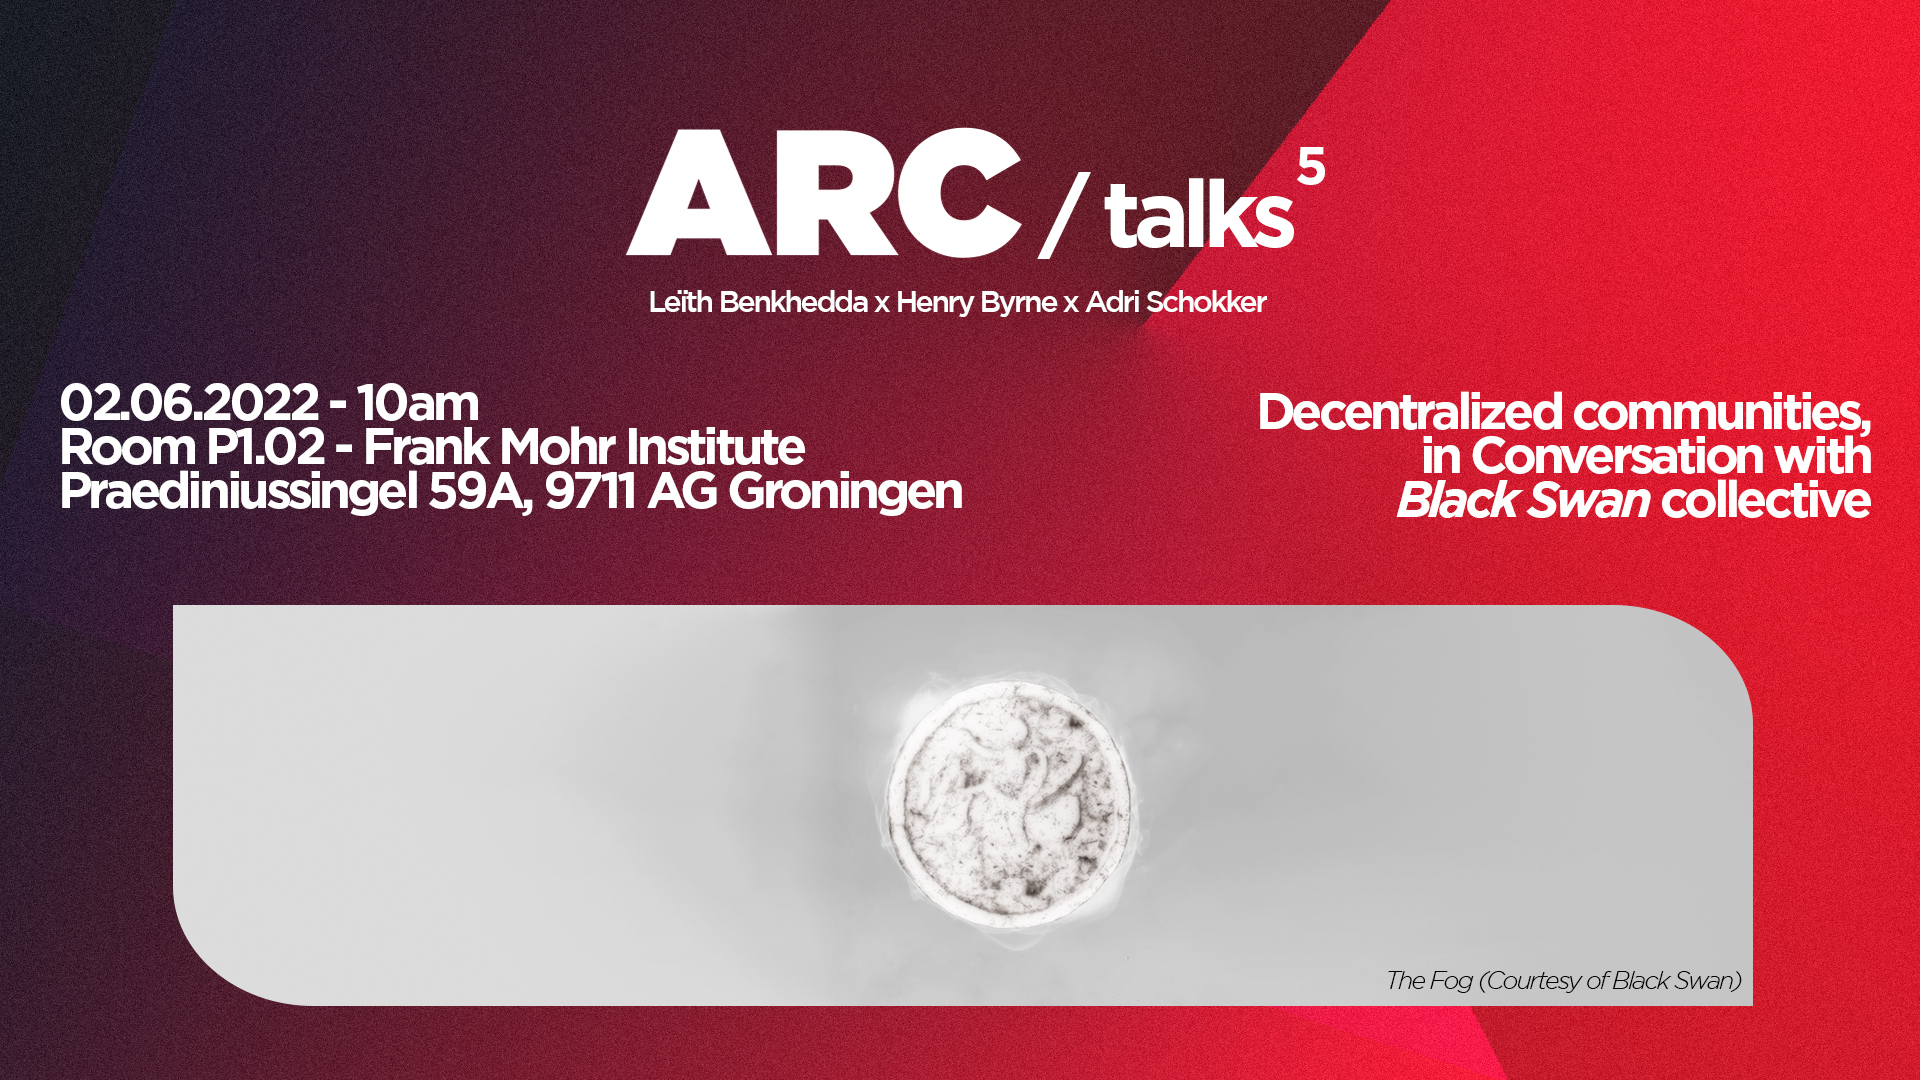 The 5 th ARC talk will take place on the 02.06.2022. We are happy to have Black Swan Projects Berlin-based collective pursuing horizontal and decentralized approaches to the traditional art world templates for art-making and discussing their approach to Decentralized communities. It will be an interesting look at how as an Artist/ Art community one can have more autonomy away from a centralized funding/art-making.  Leith Benkhedda will present on behalf of the collective.